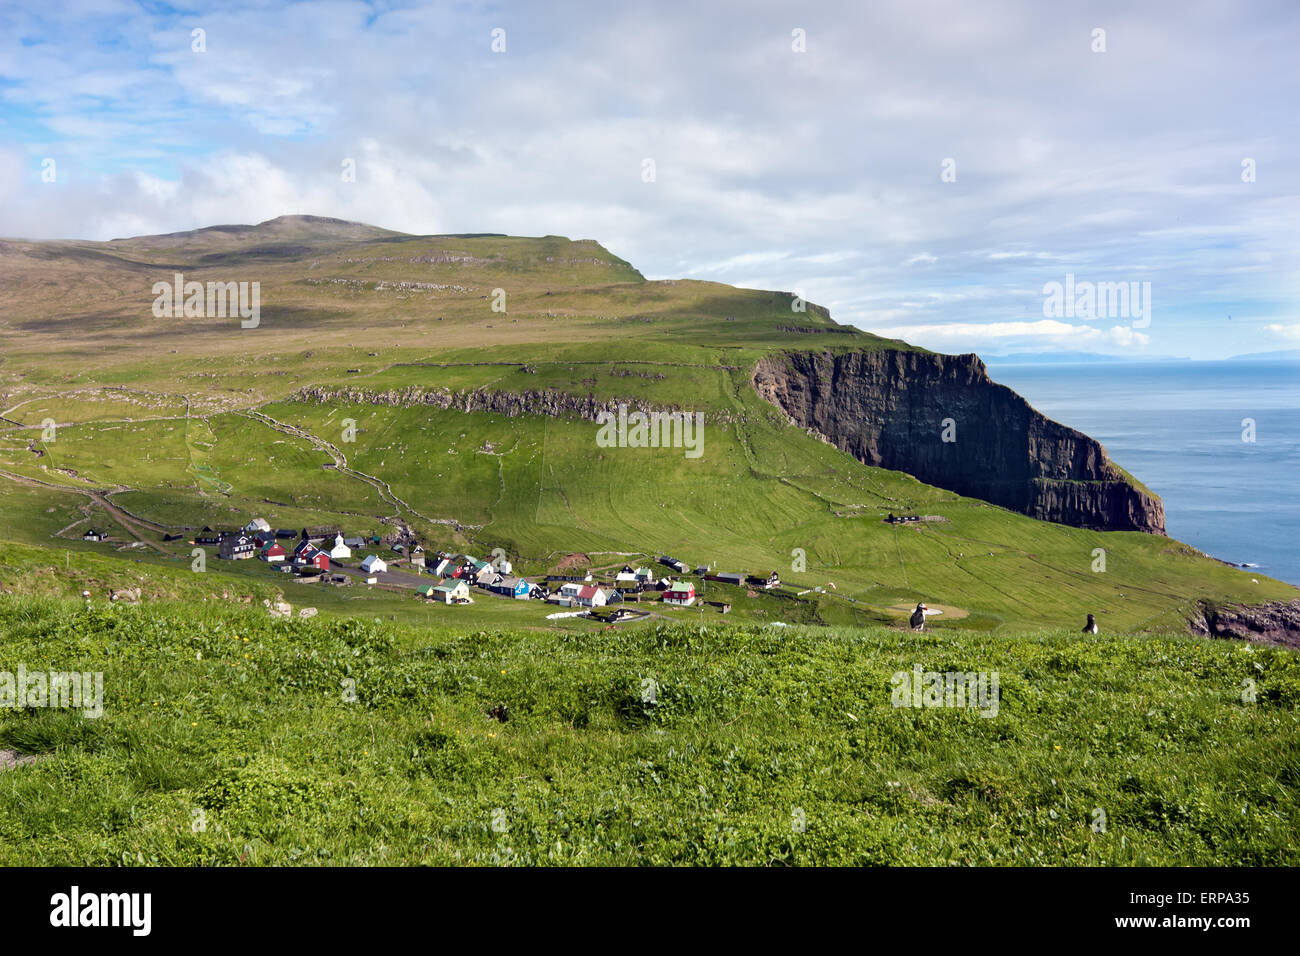 Idyllic nordic village surrounded by green fields and sea cliffs Stock Photo